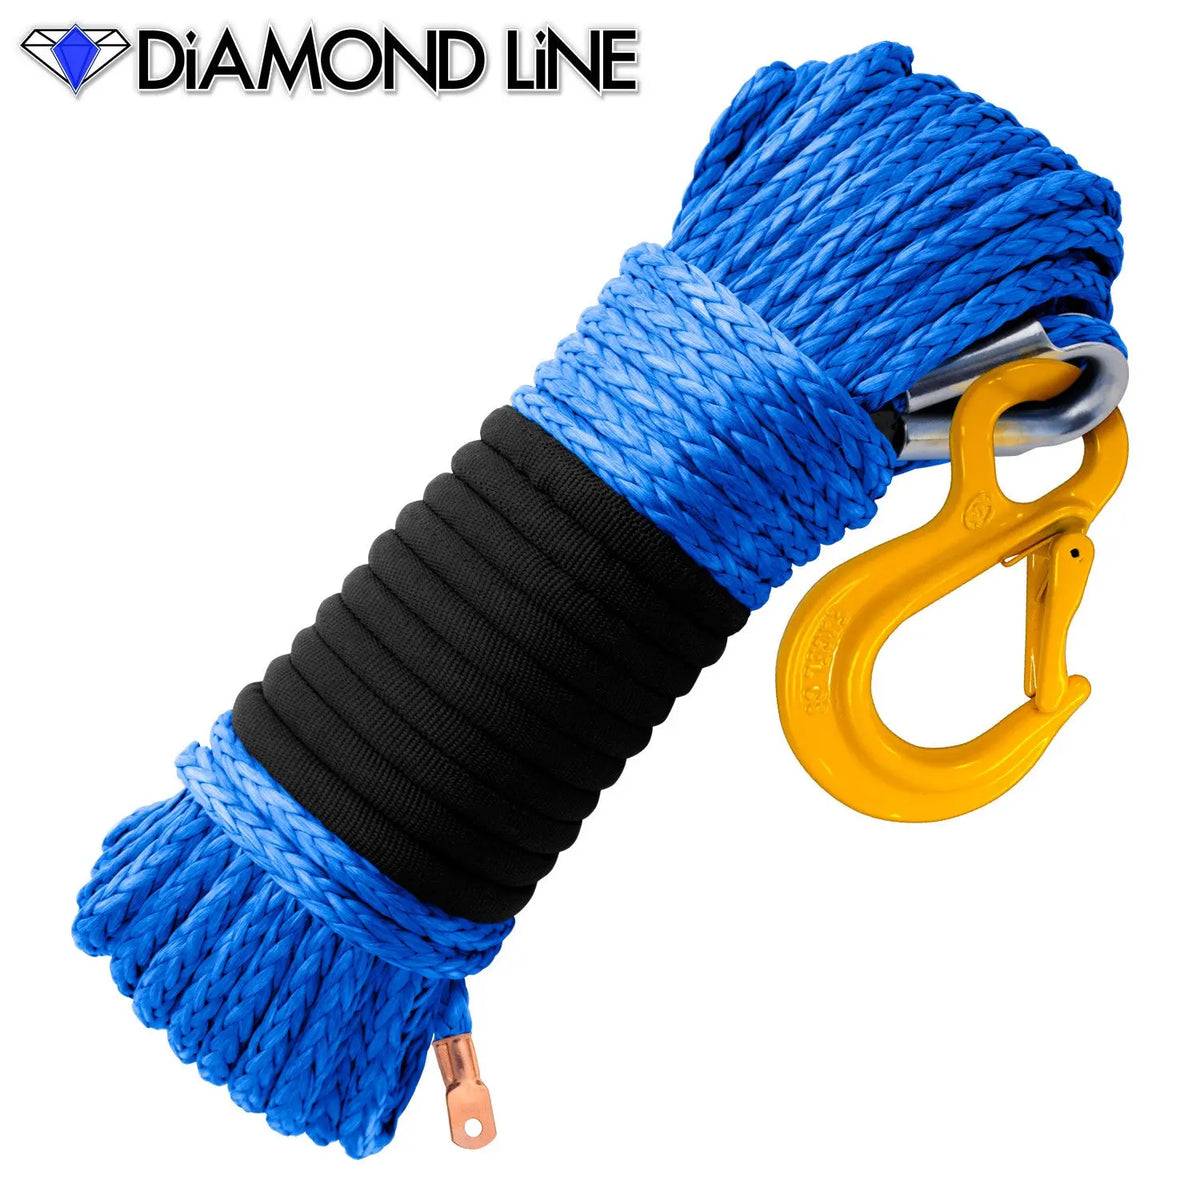 5/16" Diamond Line Winch Rope Mainline - Blue with Hook. 